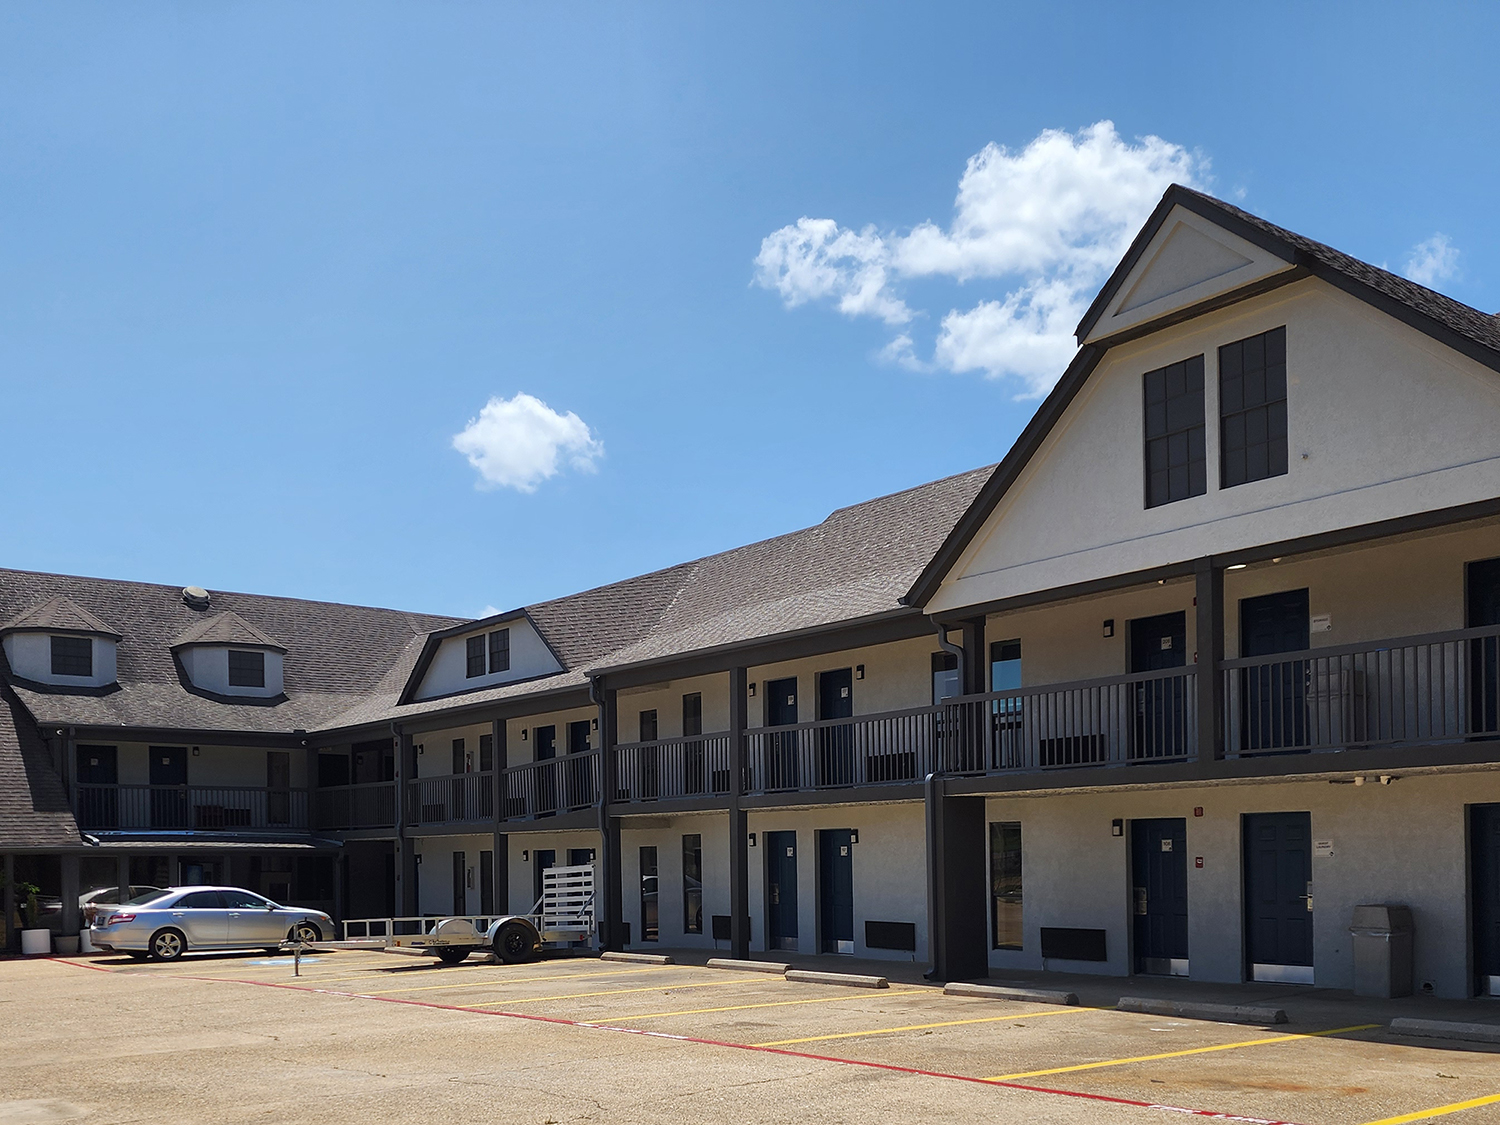 The exterior, parking lot, and guest room doors of the Americas Best Value Inn Longview hotel.